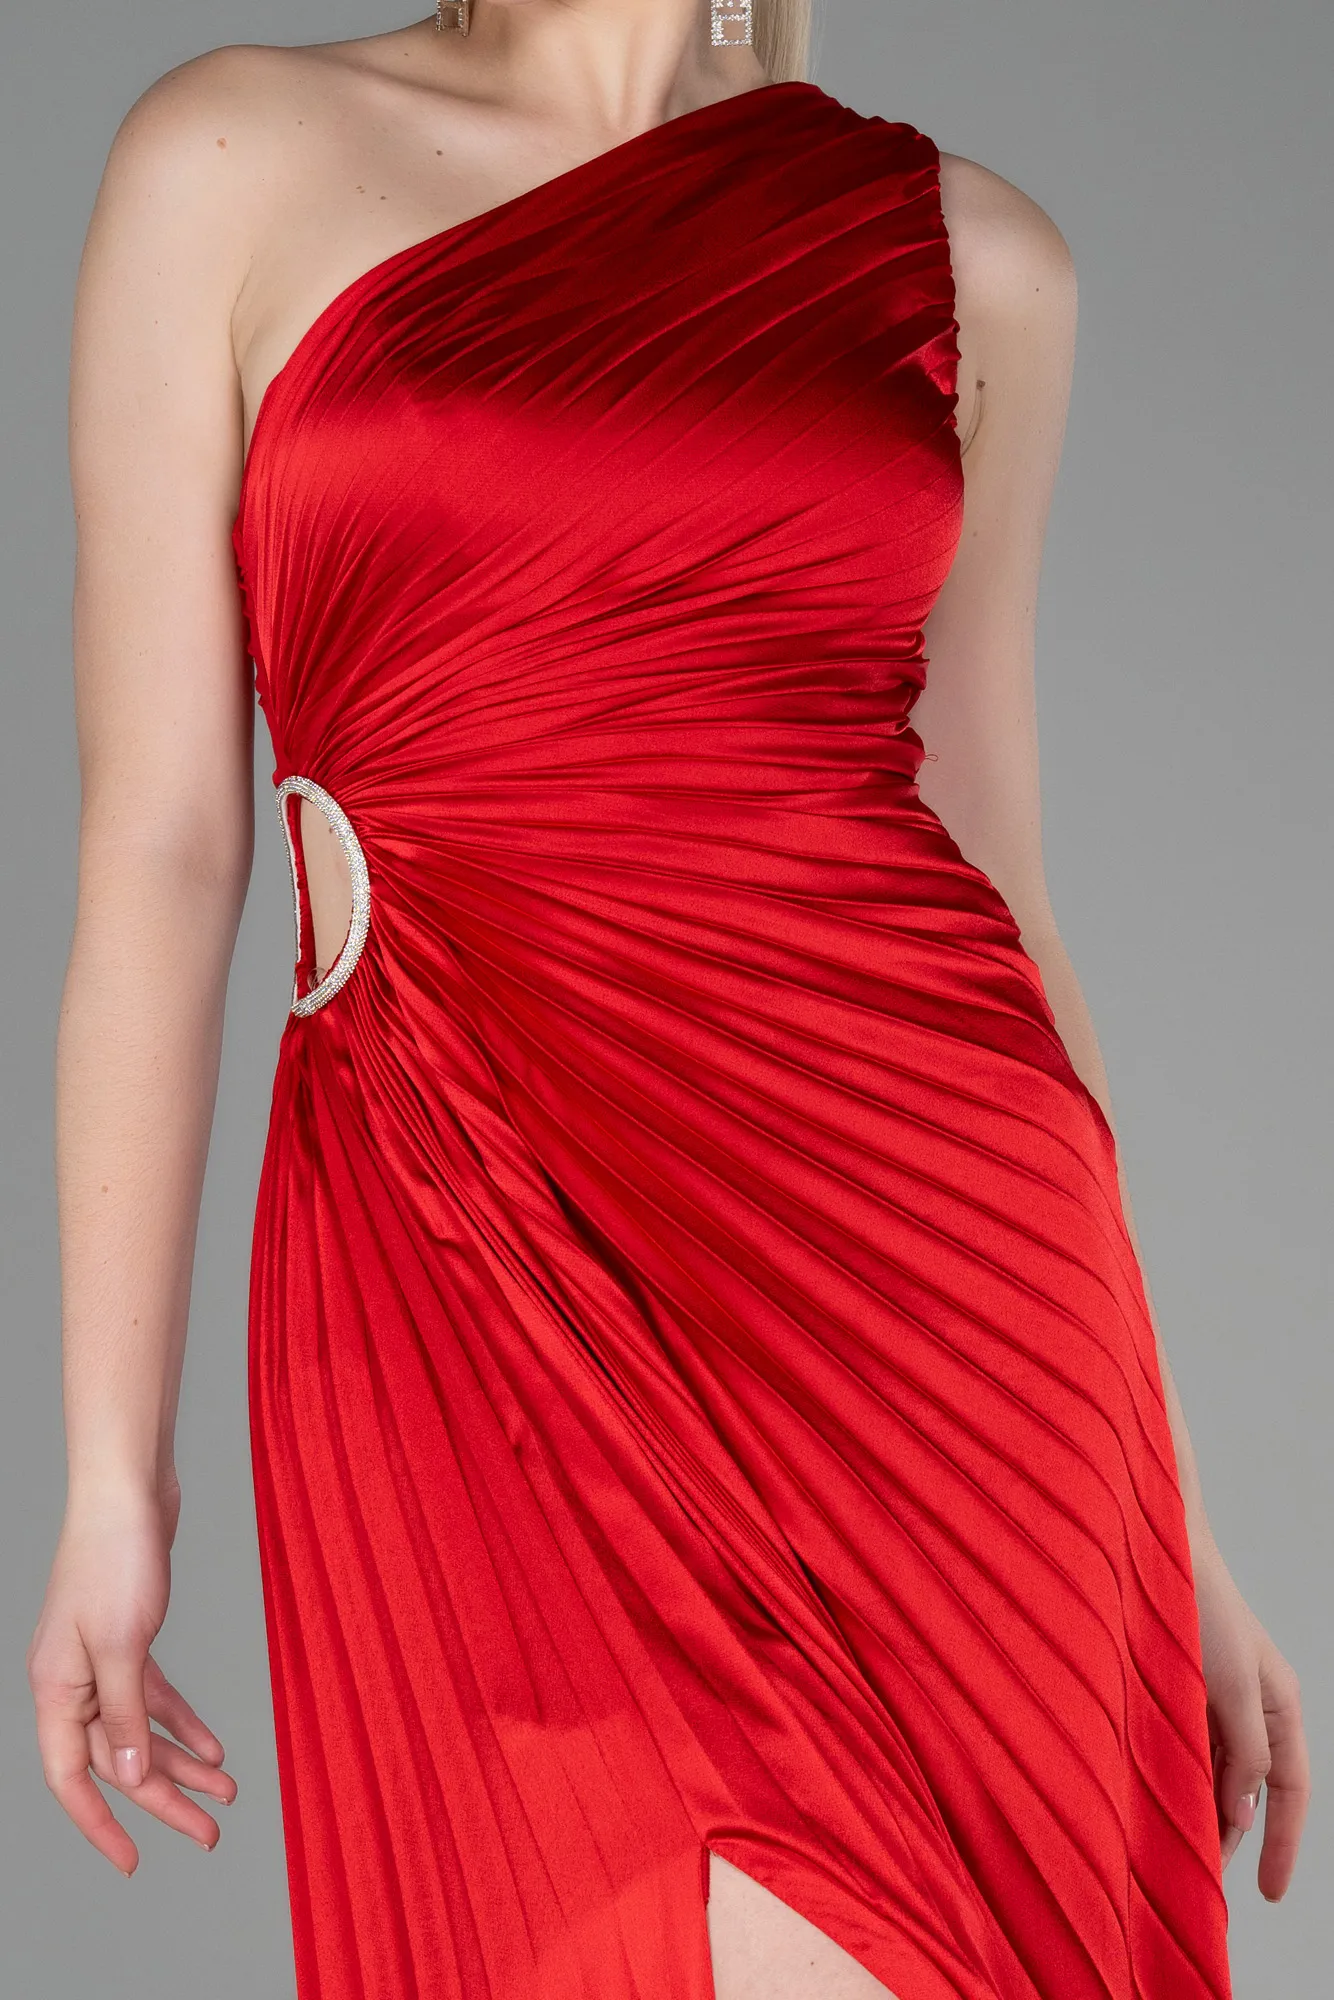 Red-Long Satin Prom Gown ABU3159